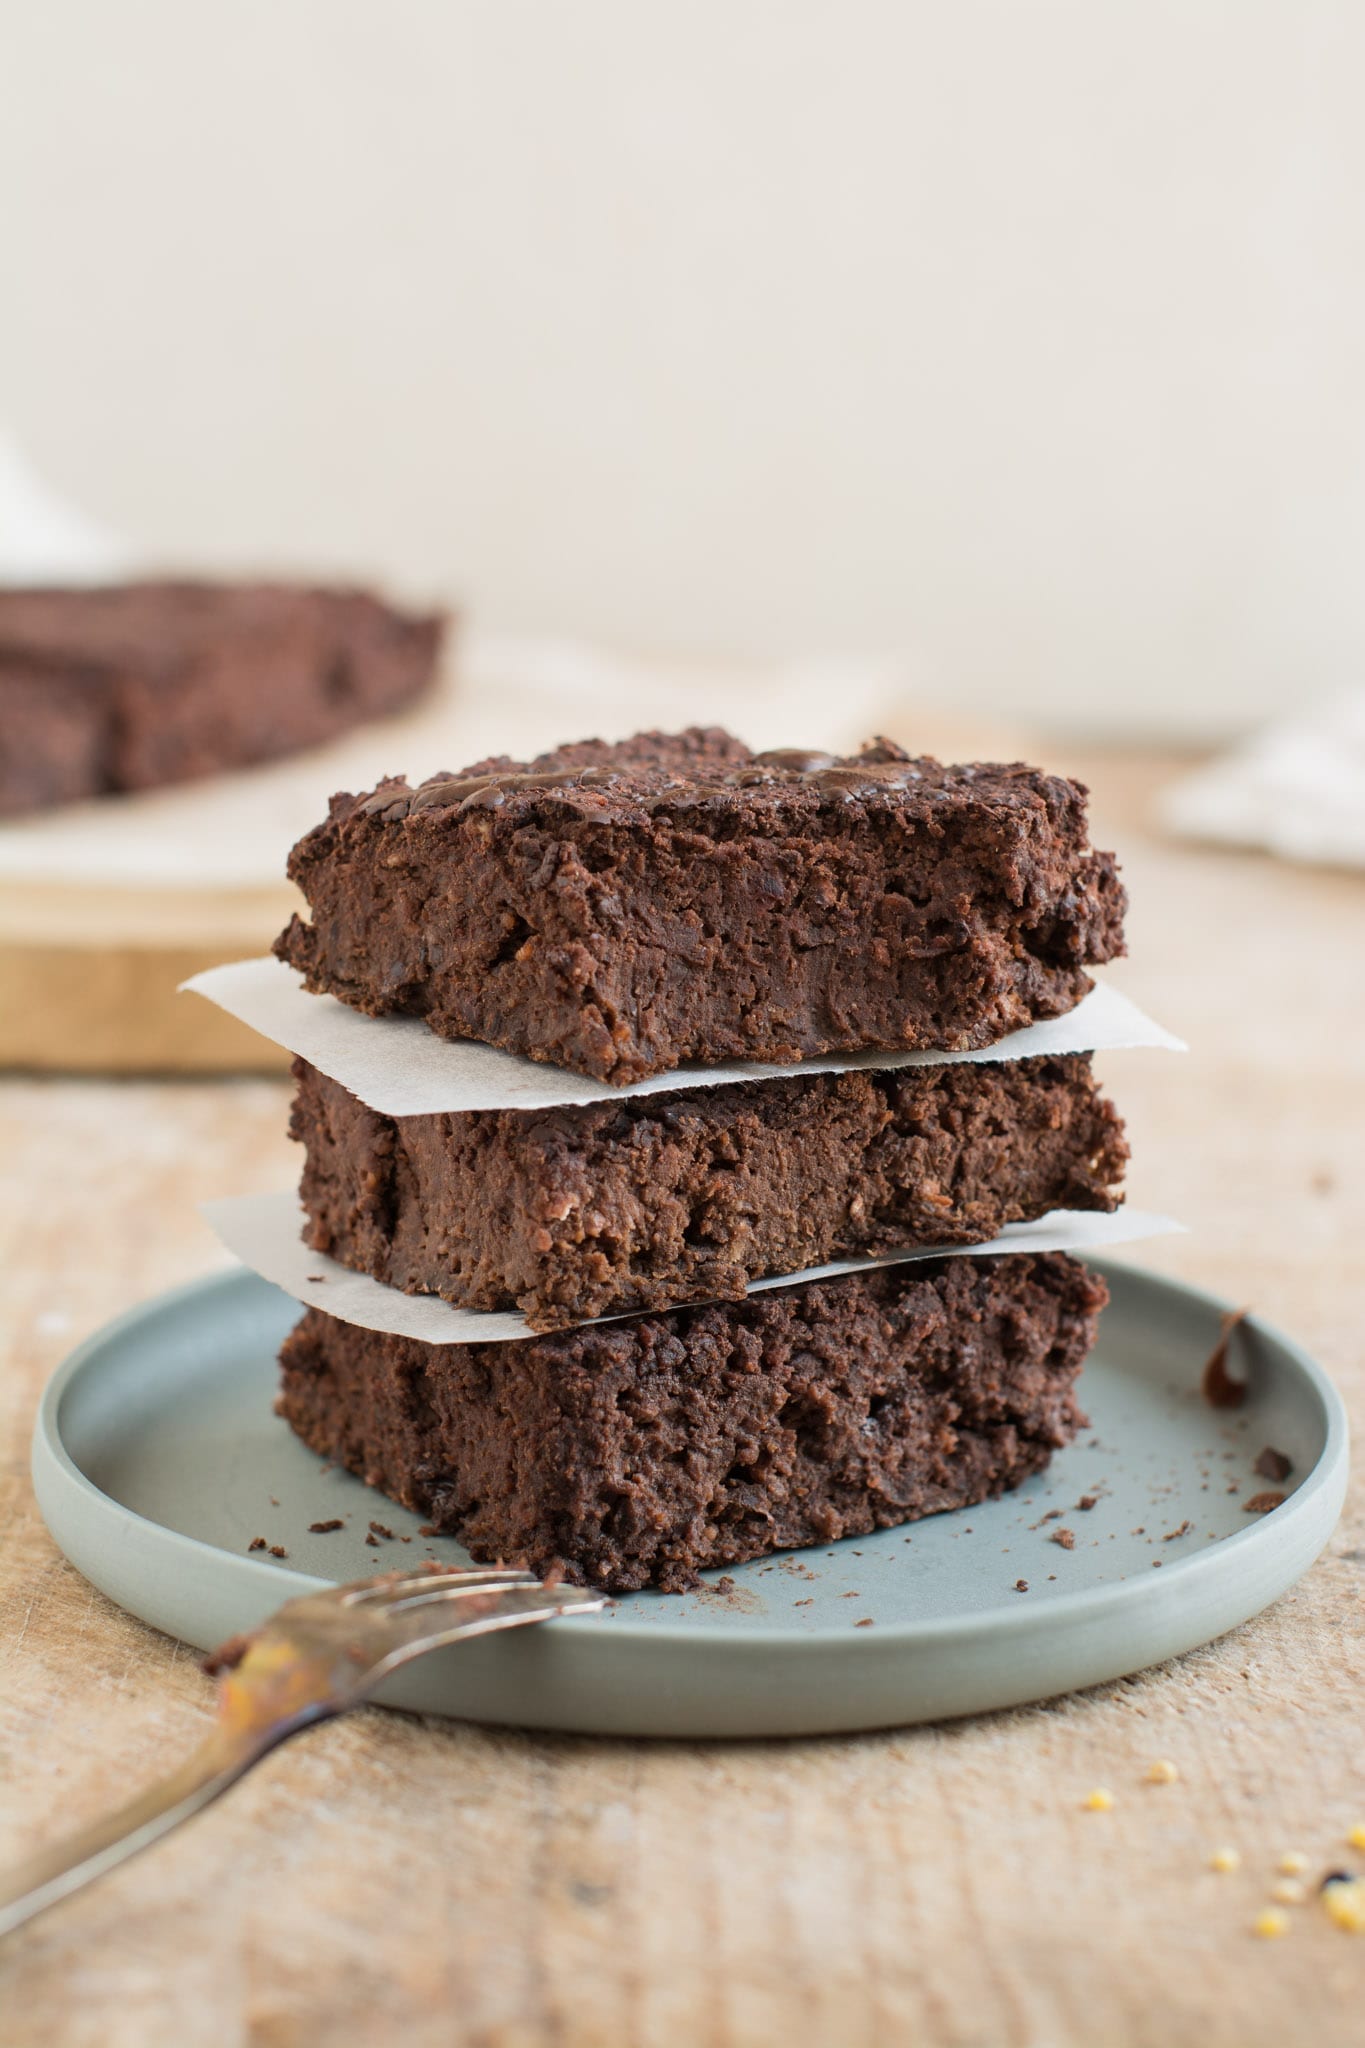 Soft and fudgy whole food plant-based chocolate beet brownies that are gluten-free and exceptionally easy to make. You’ll only need a food processor and 10 minutes of your time. 